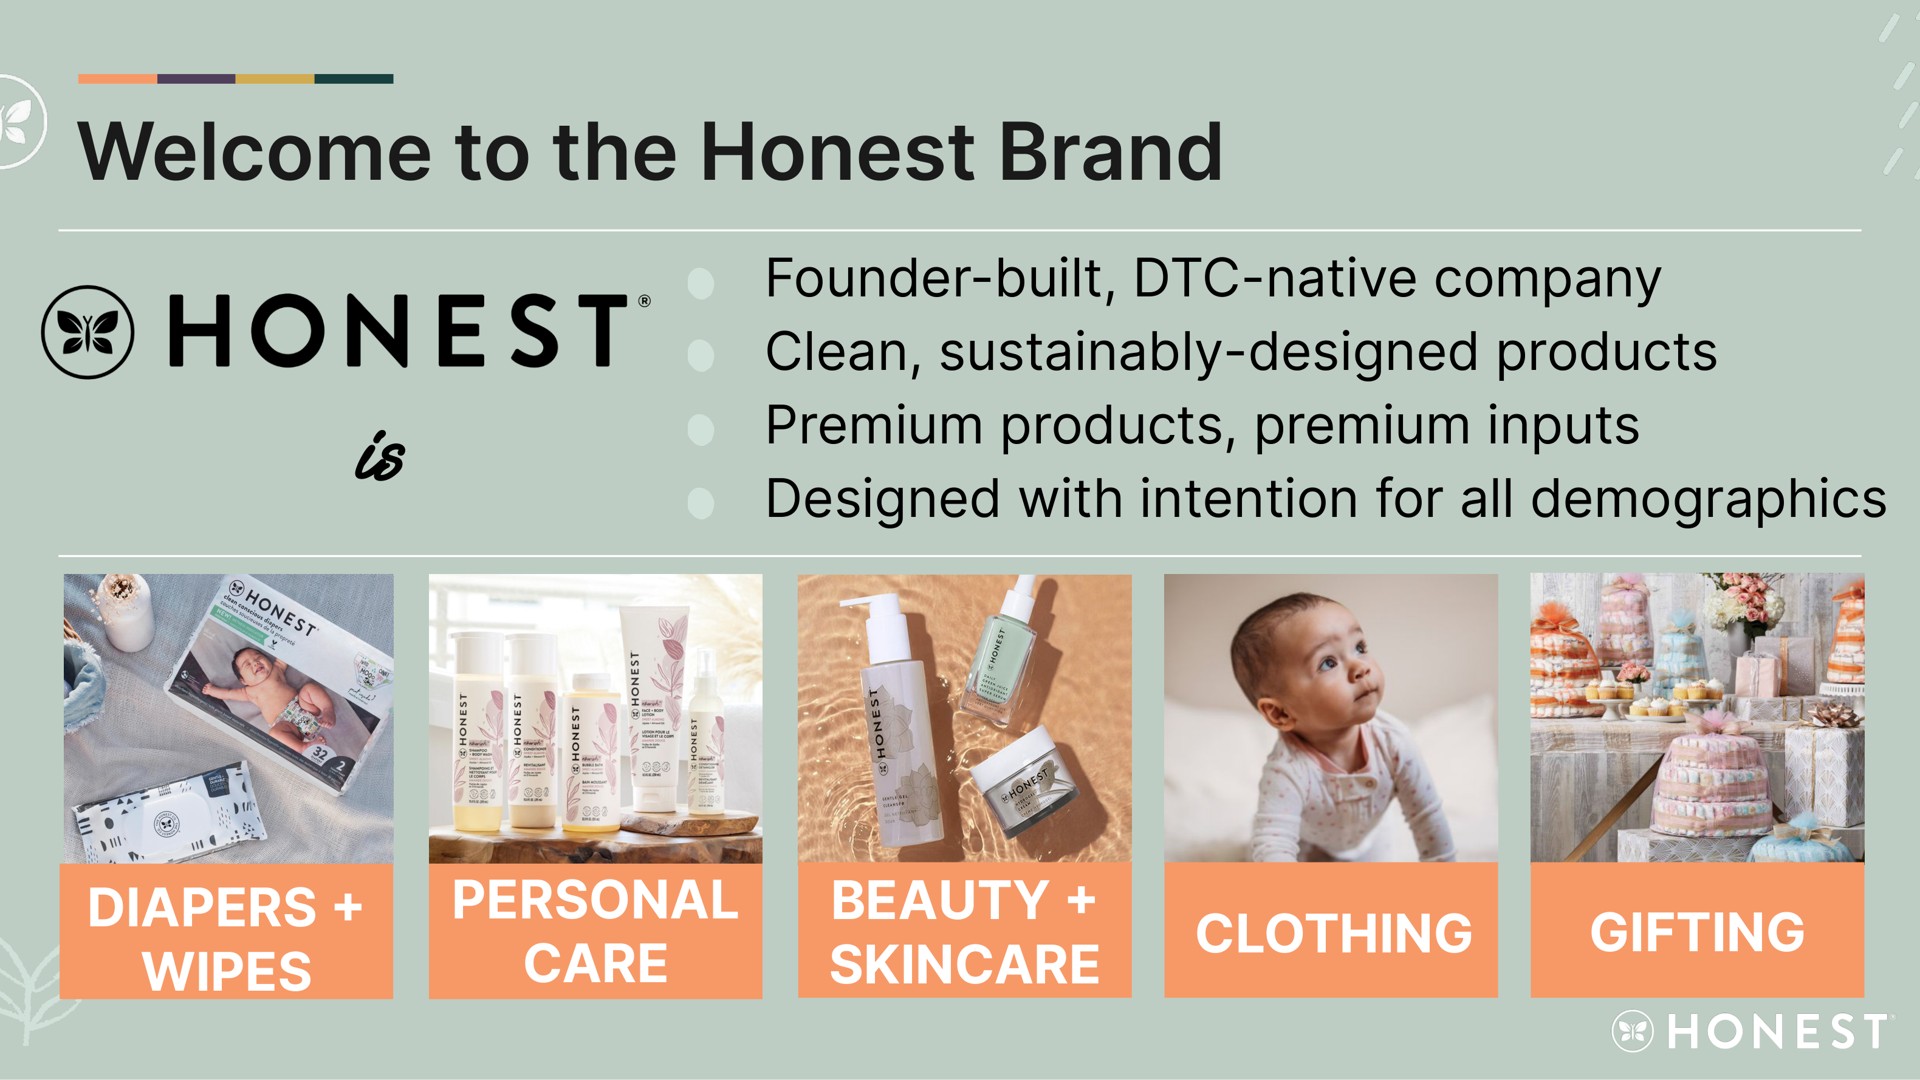 welcome to the honest brand is ses | Honest